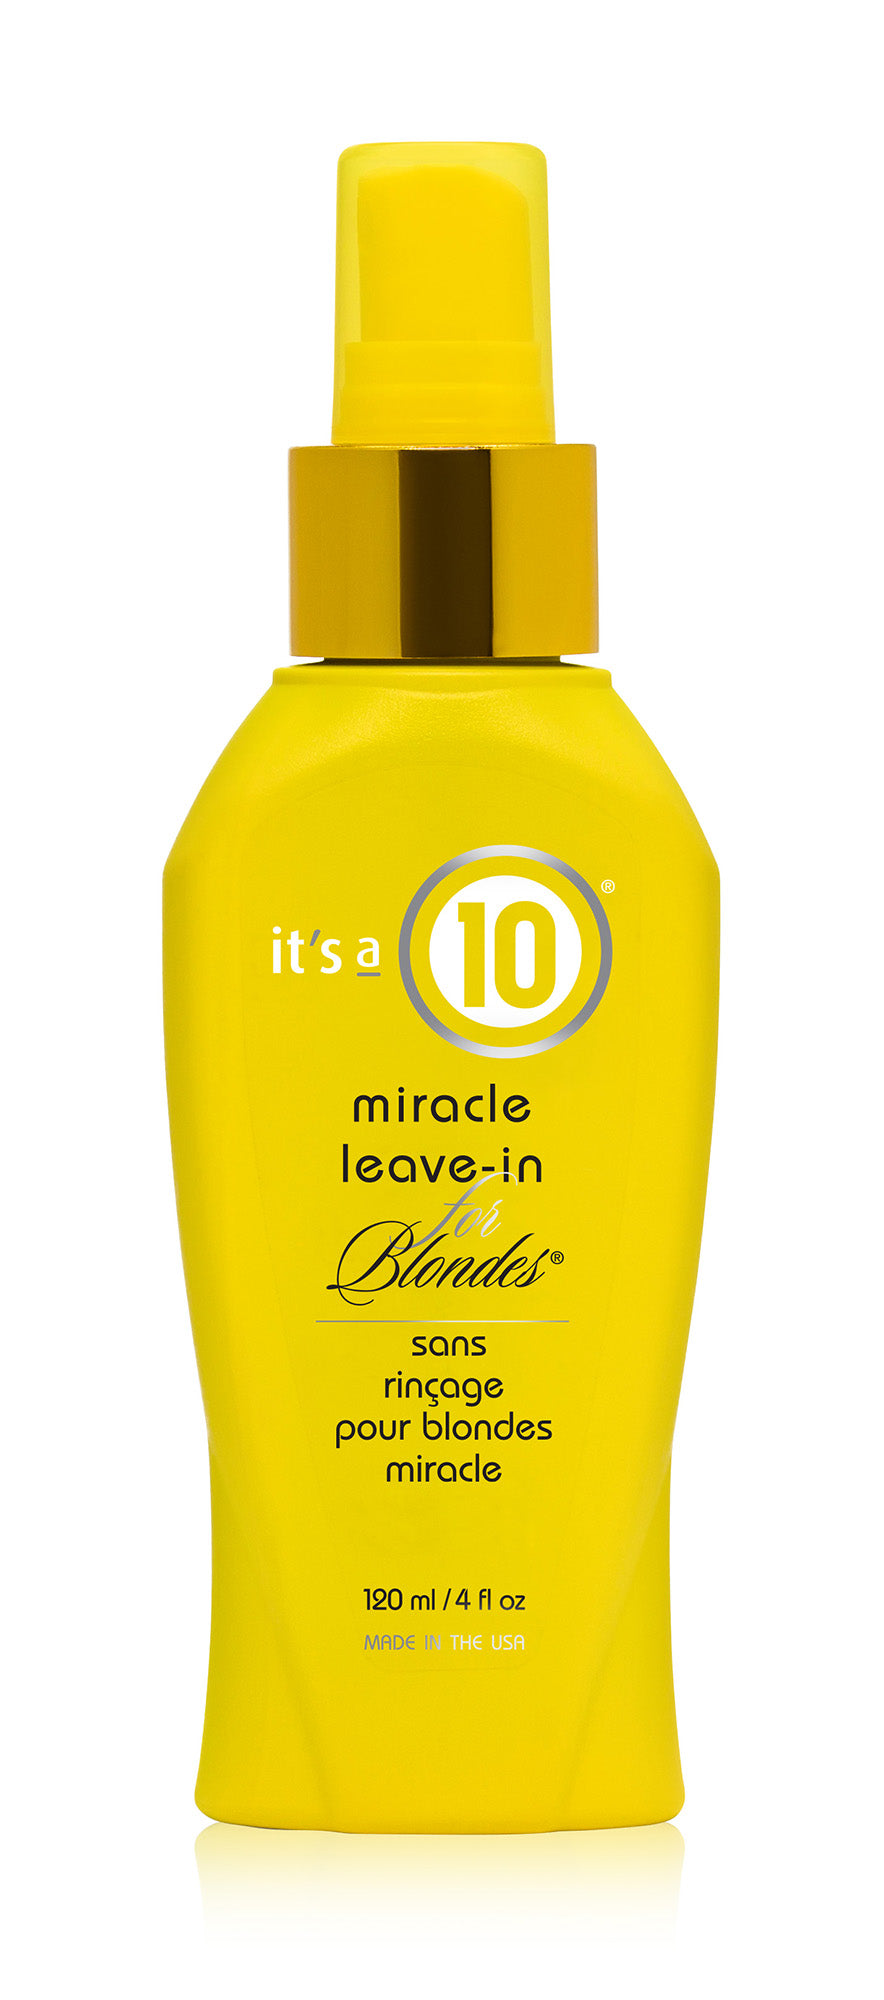 It’s a 10 Potion 10 Instant Repair Leave-In Conditioner